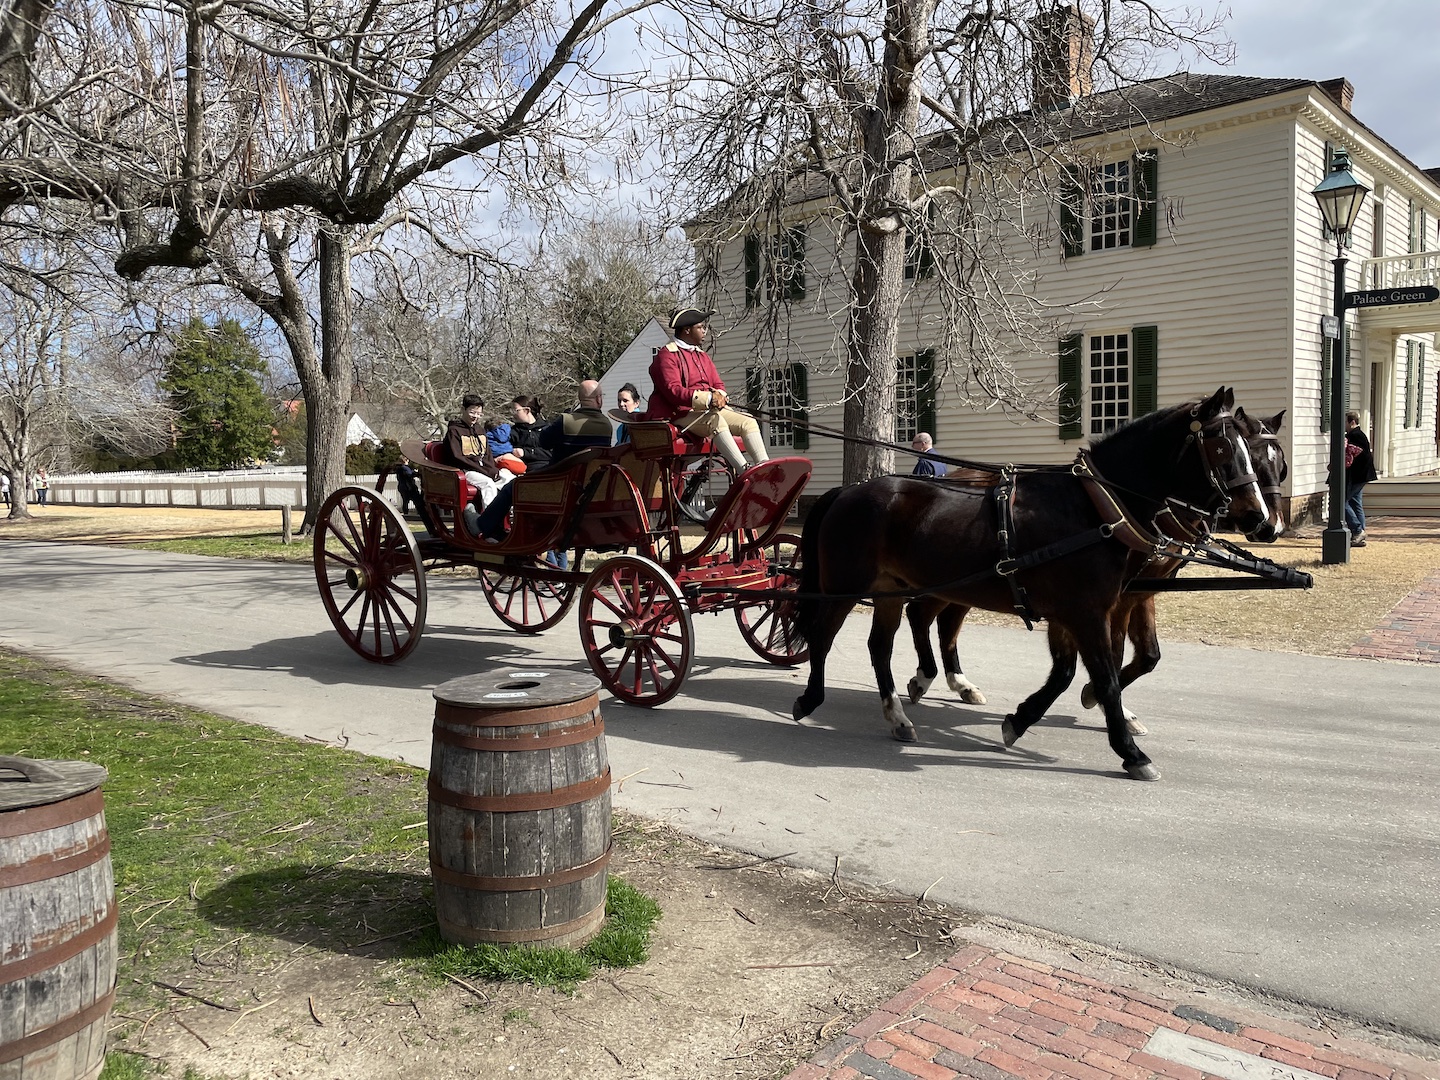 A photo of a horse drawn carriage driven by a Black man in period costume in Colonial Williamsburg